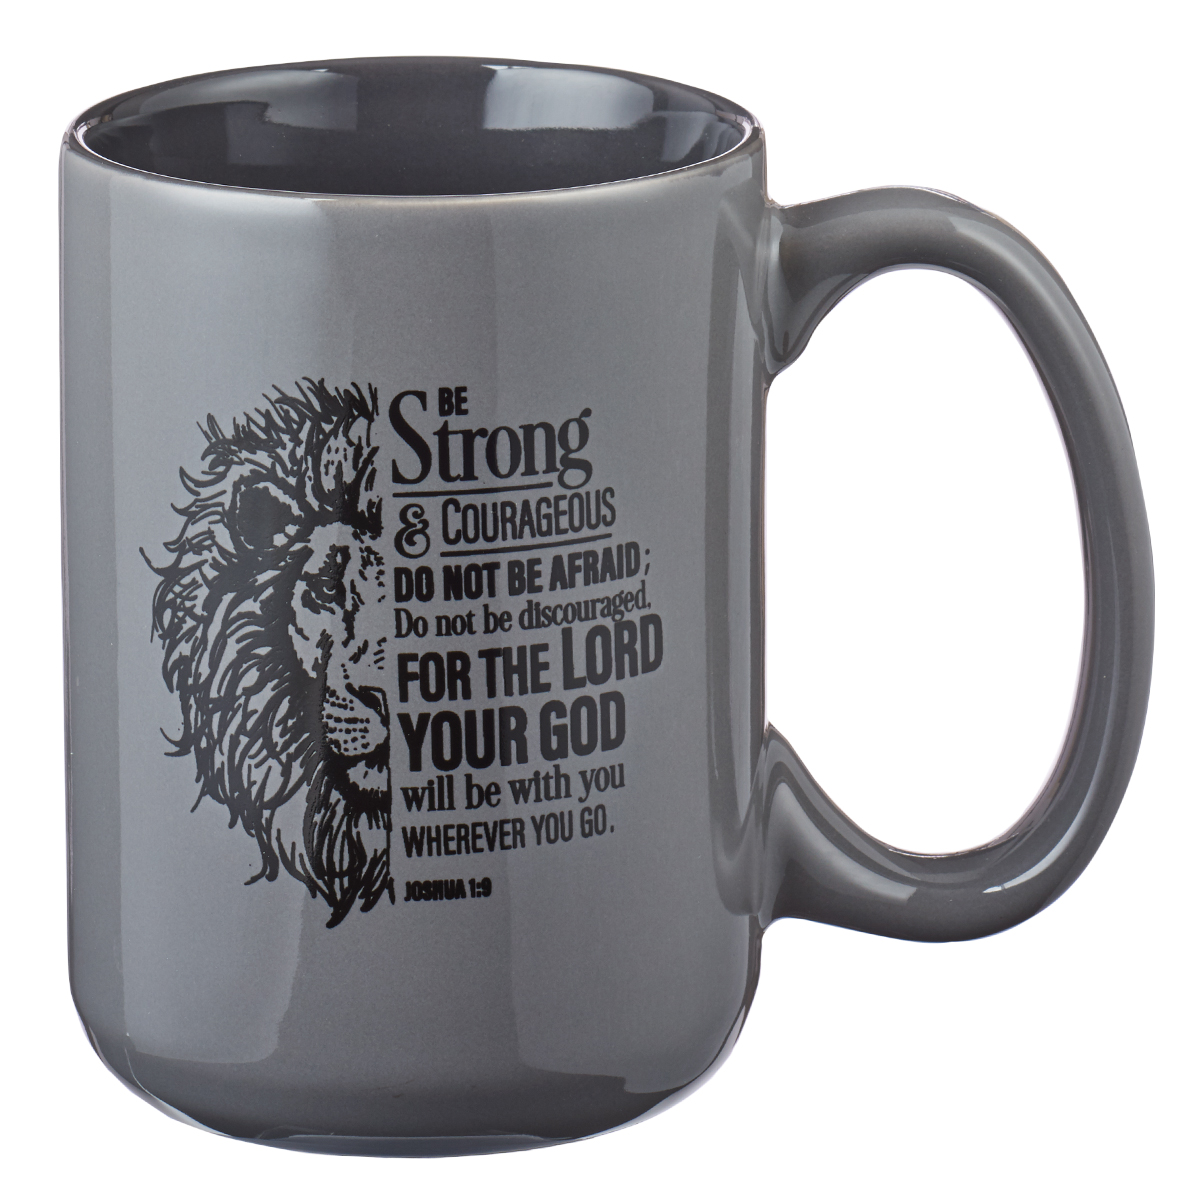 Blessed is the Man Stainless Steel Travel Mug with Handle - Psalm 84:5